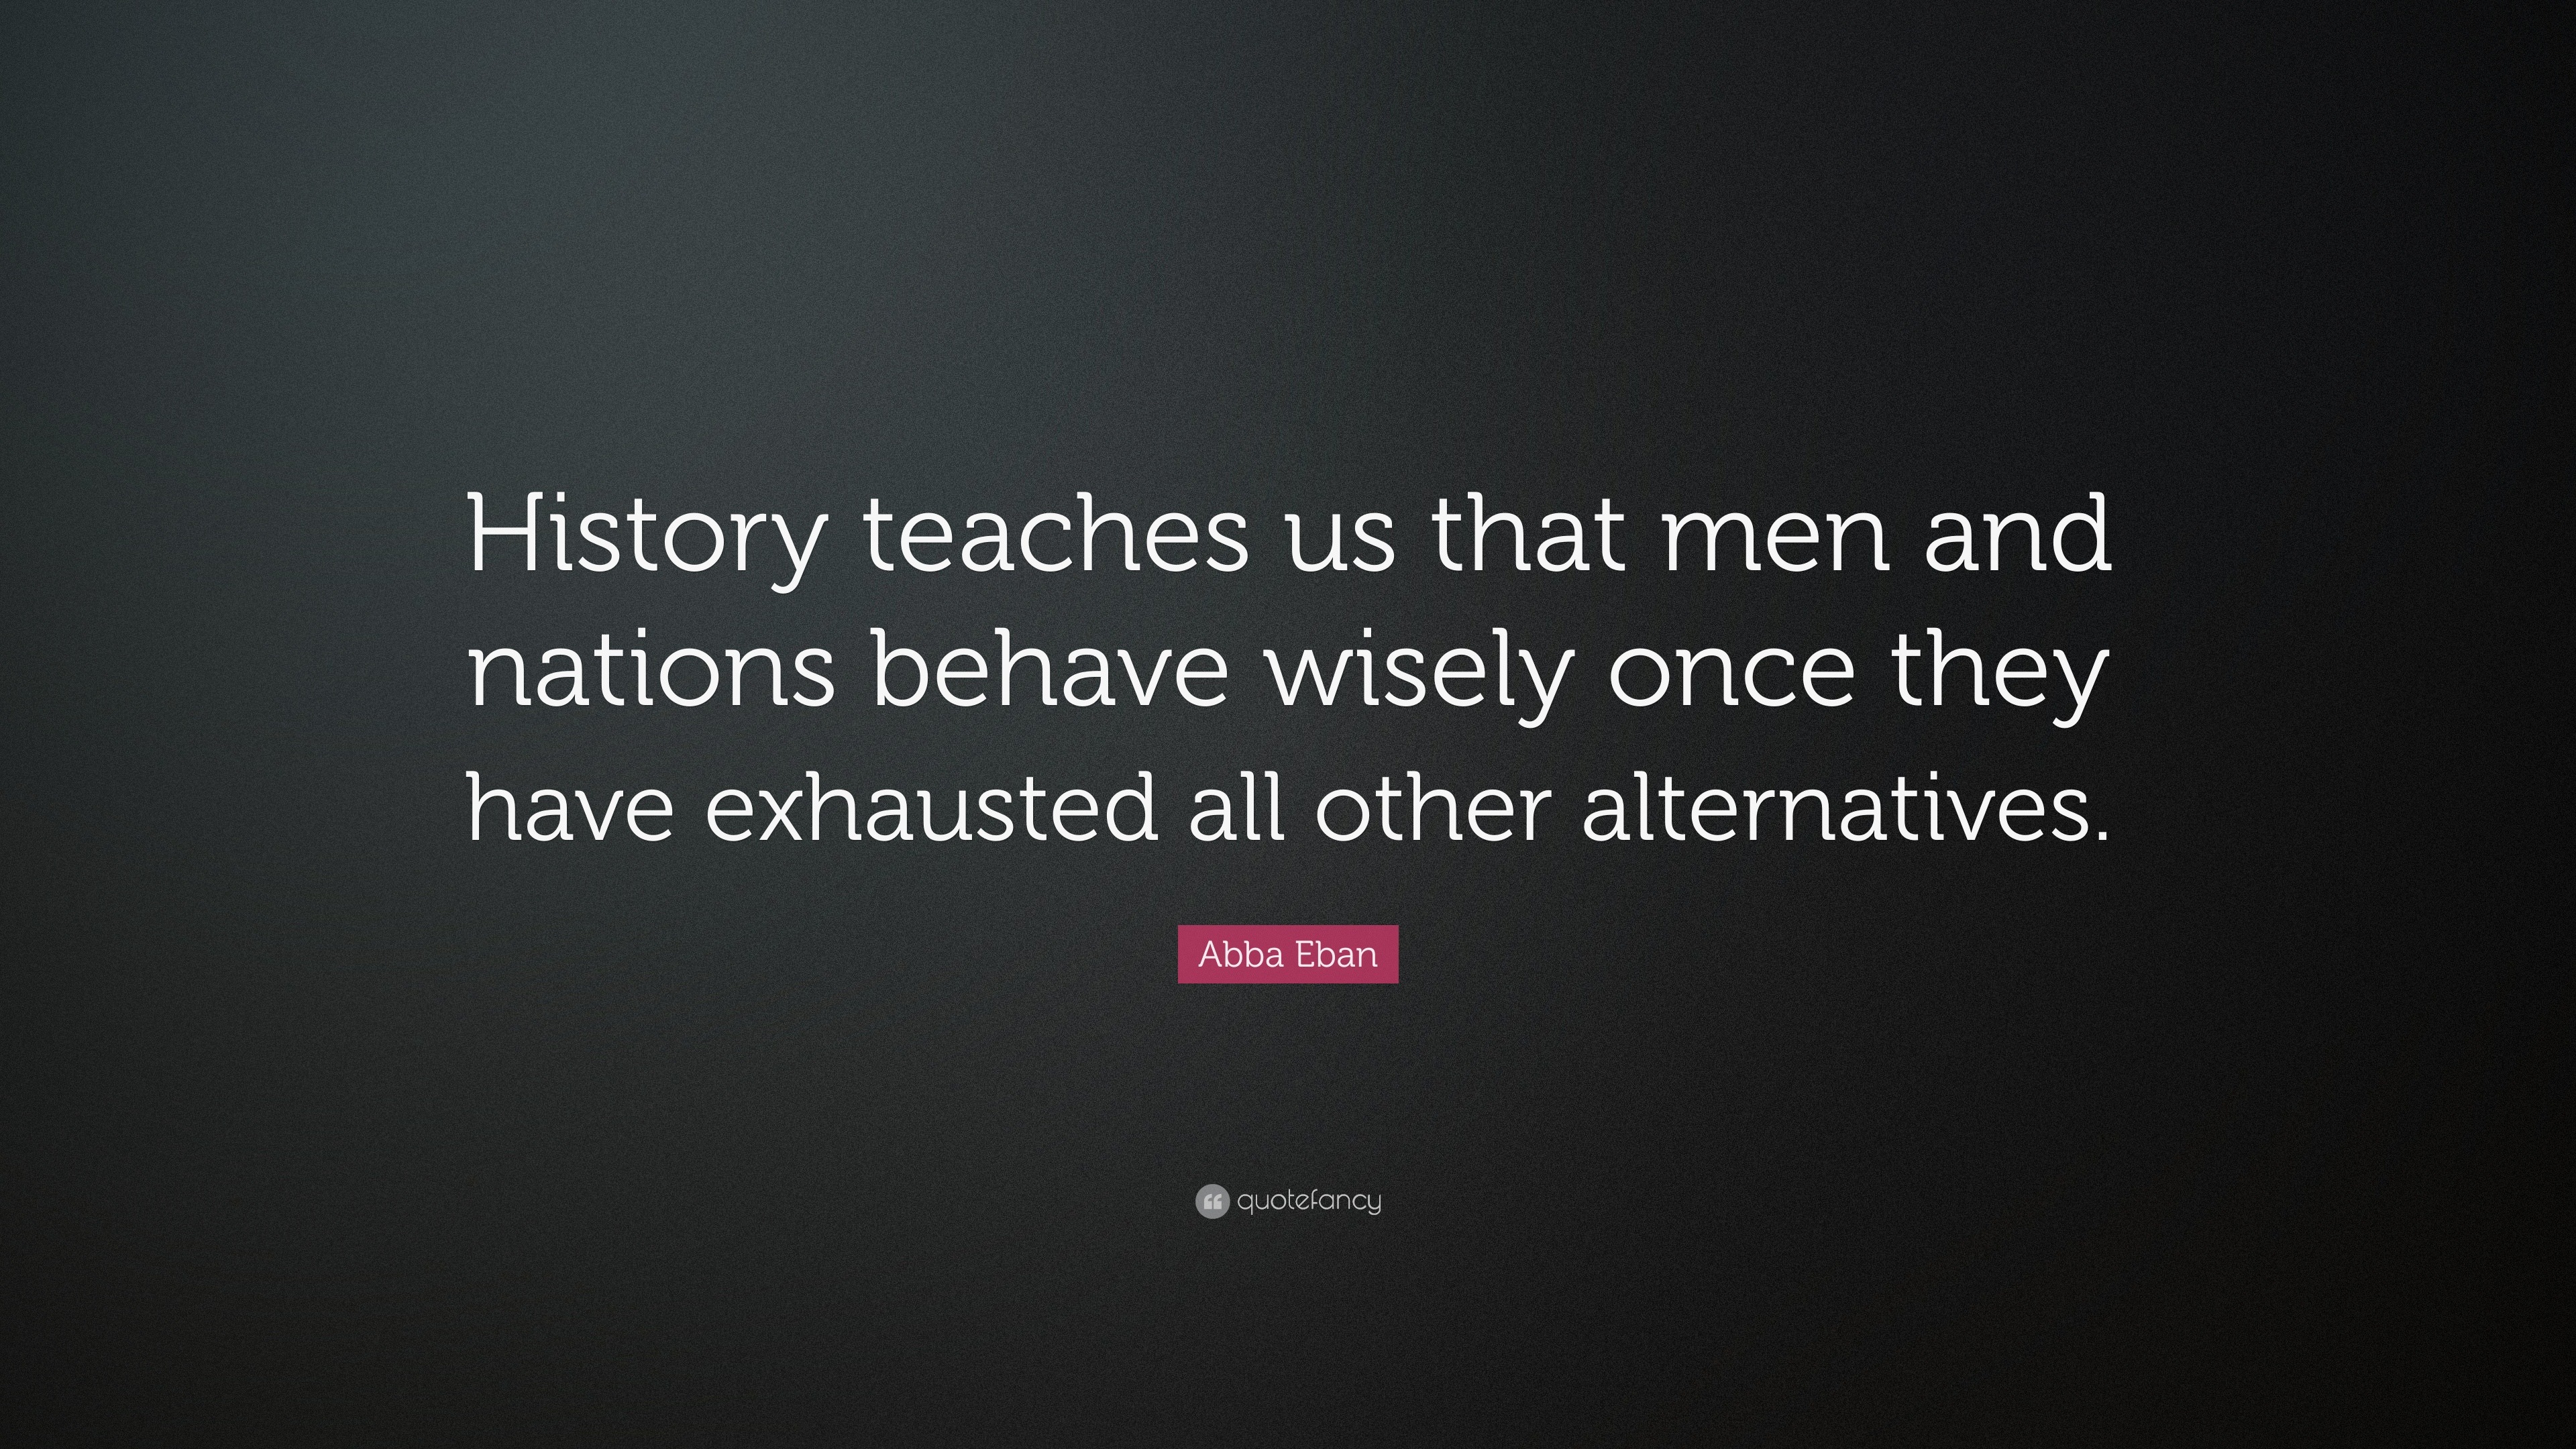 Abba Eban Quote: “History Teaches Us That Men And Nations Behave Wisely  Once They Have Exhausted